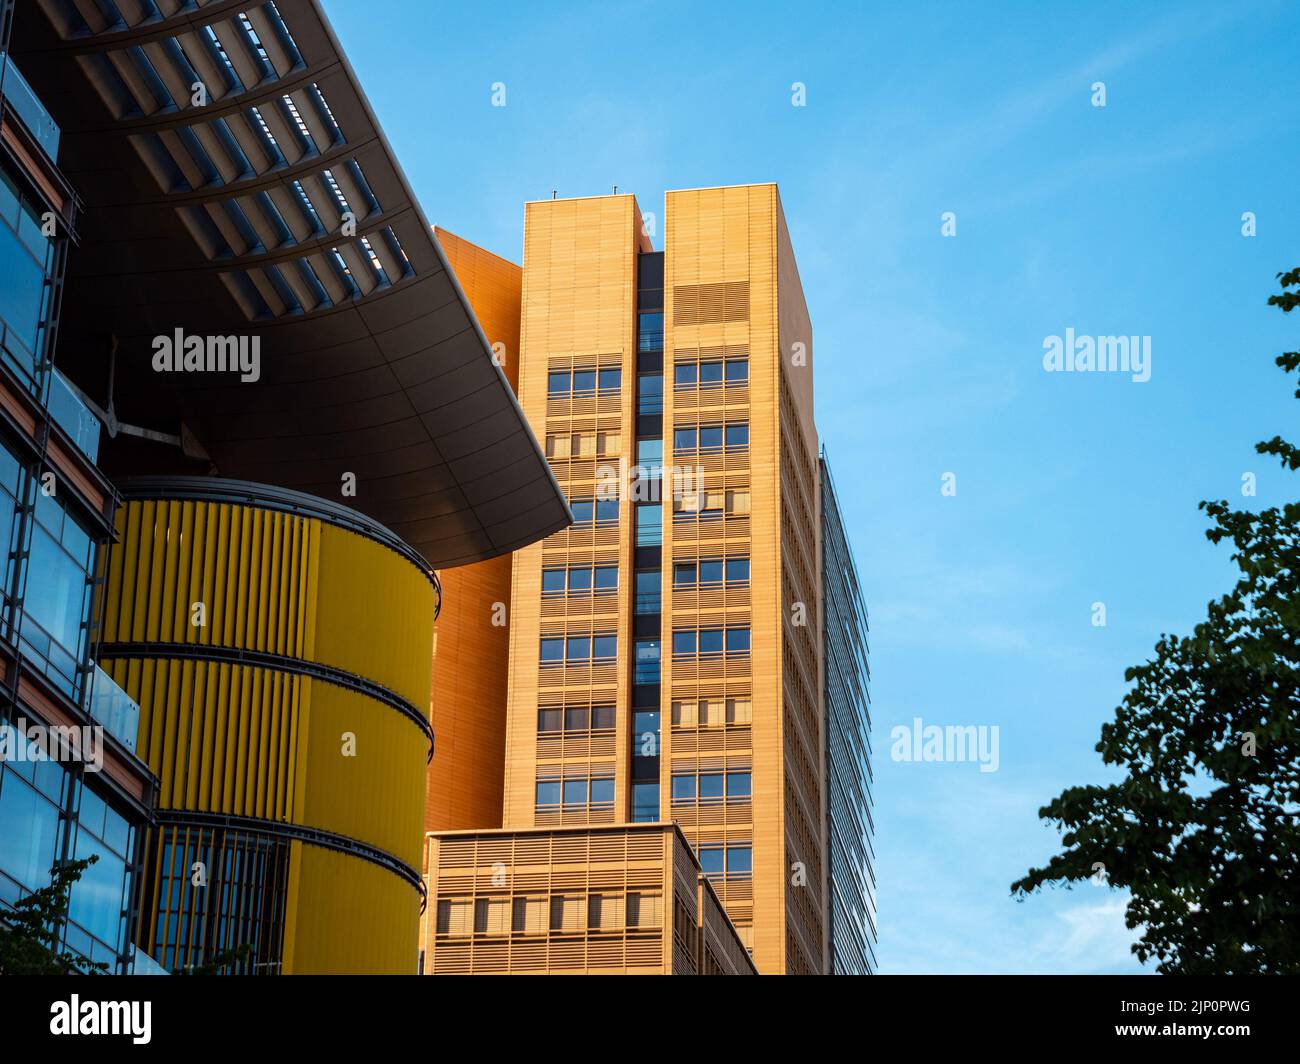 Architecture by Richard Rogers in the front and a high rise building designed by Renzo Piano in the background. Office houses at the Potsdamer Platz. Stock Photo